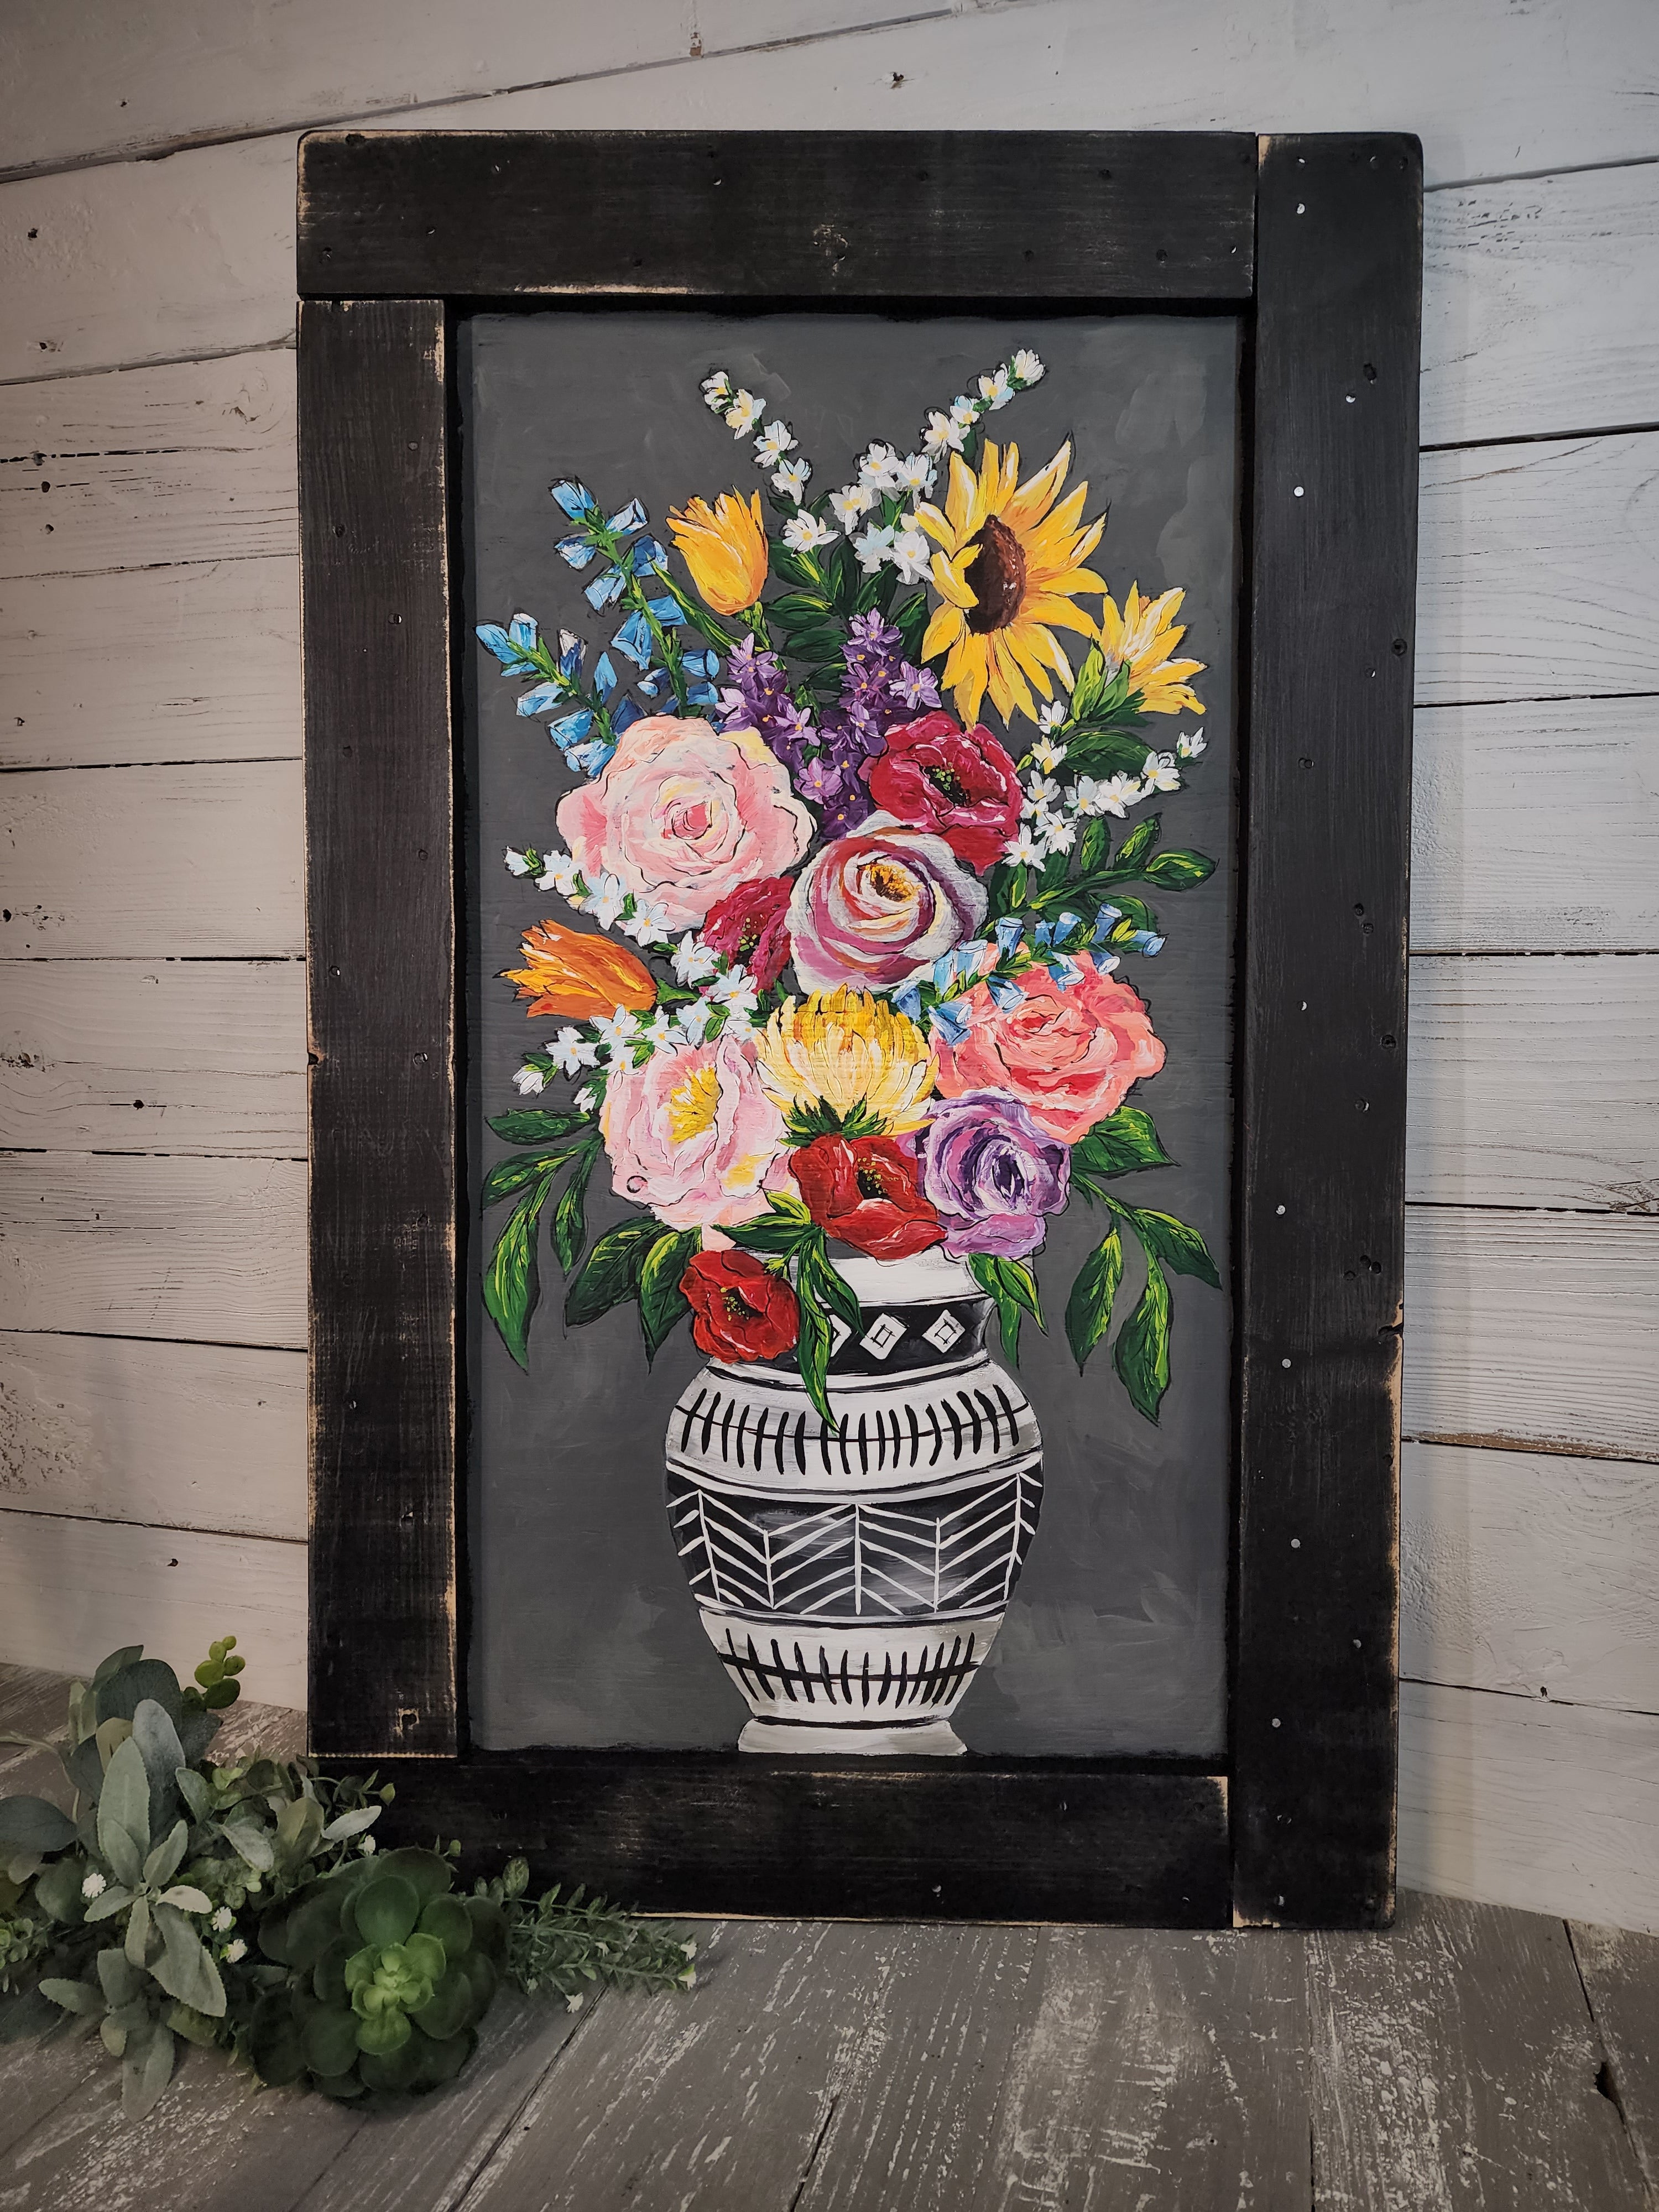 Hand painted original acrylic flowers, bright floral artwork on pallet wood top, abstract floral painting, black & white vase